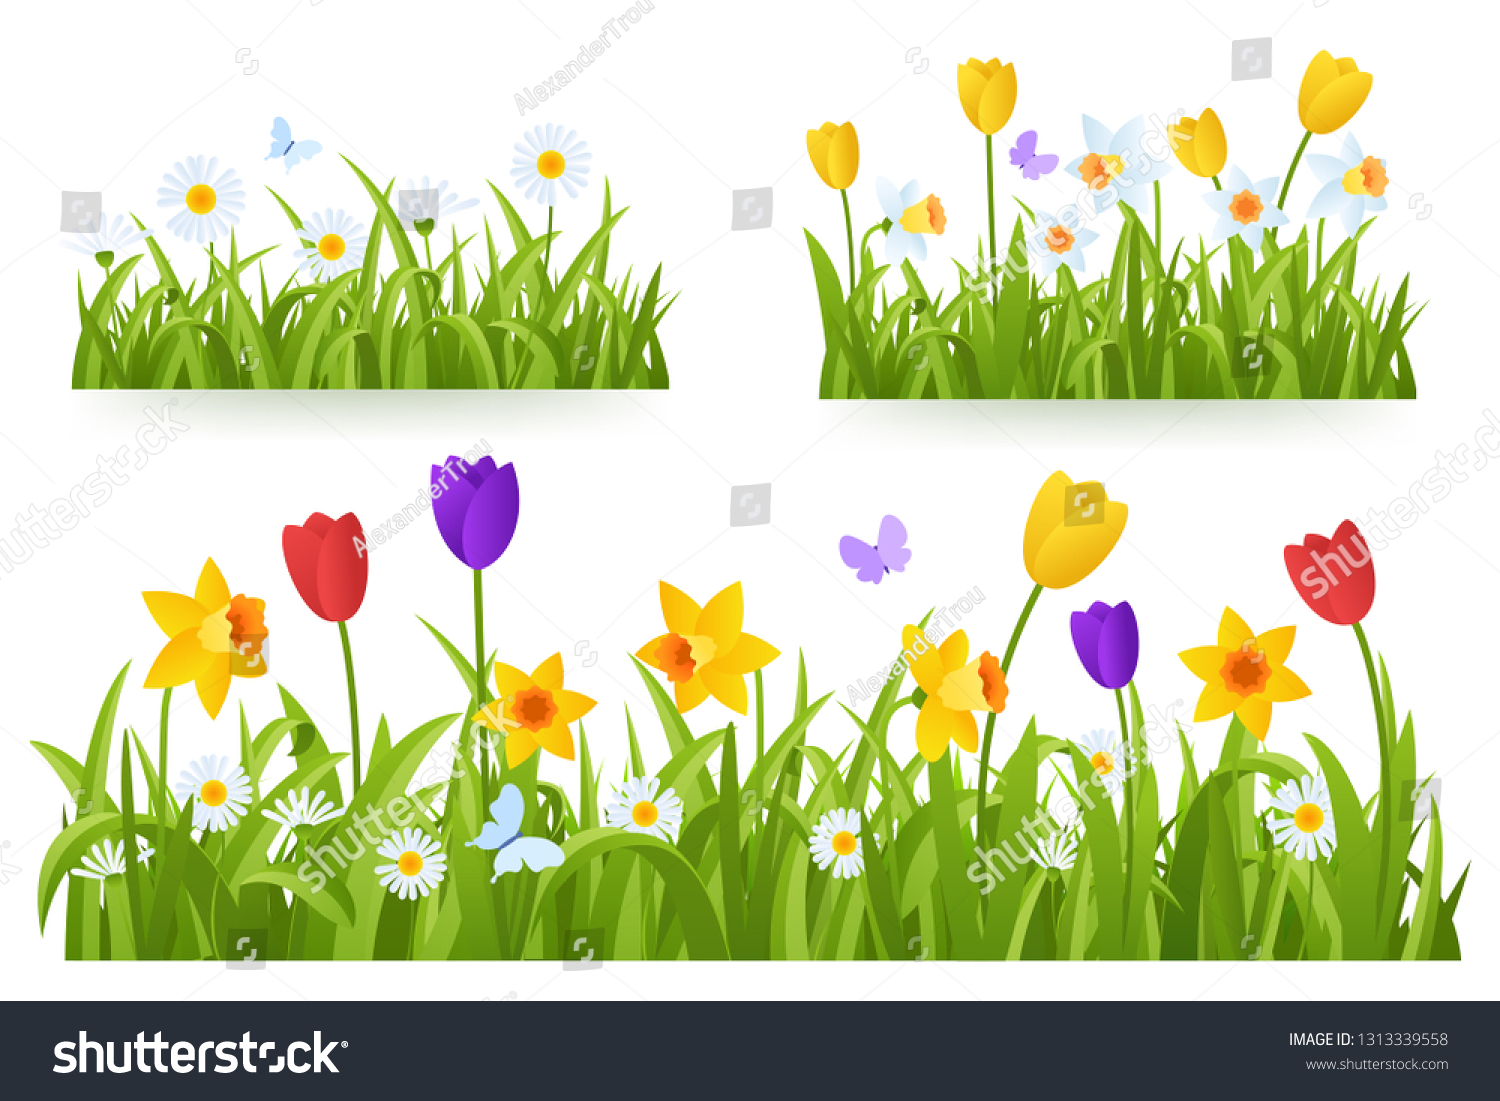 SVG of Spring grass border with early spring flowers and butterfly isolated on white background. Illustration of colored tulips, daffodils and daisies. Garden bed. Springtime design element. Vector eps 10. svg